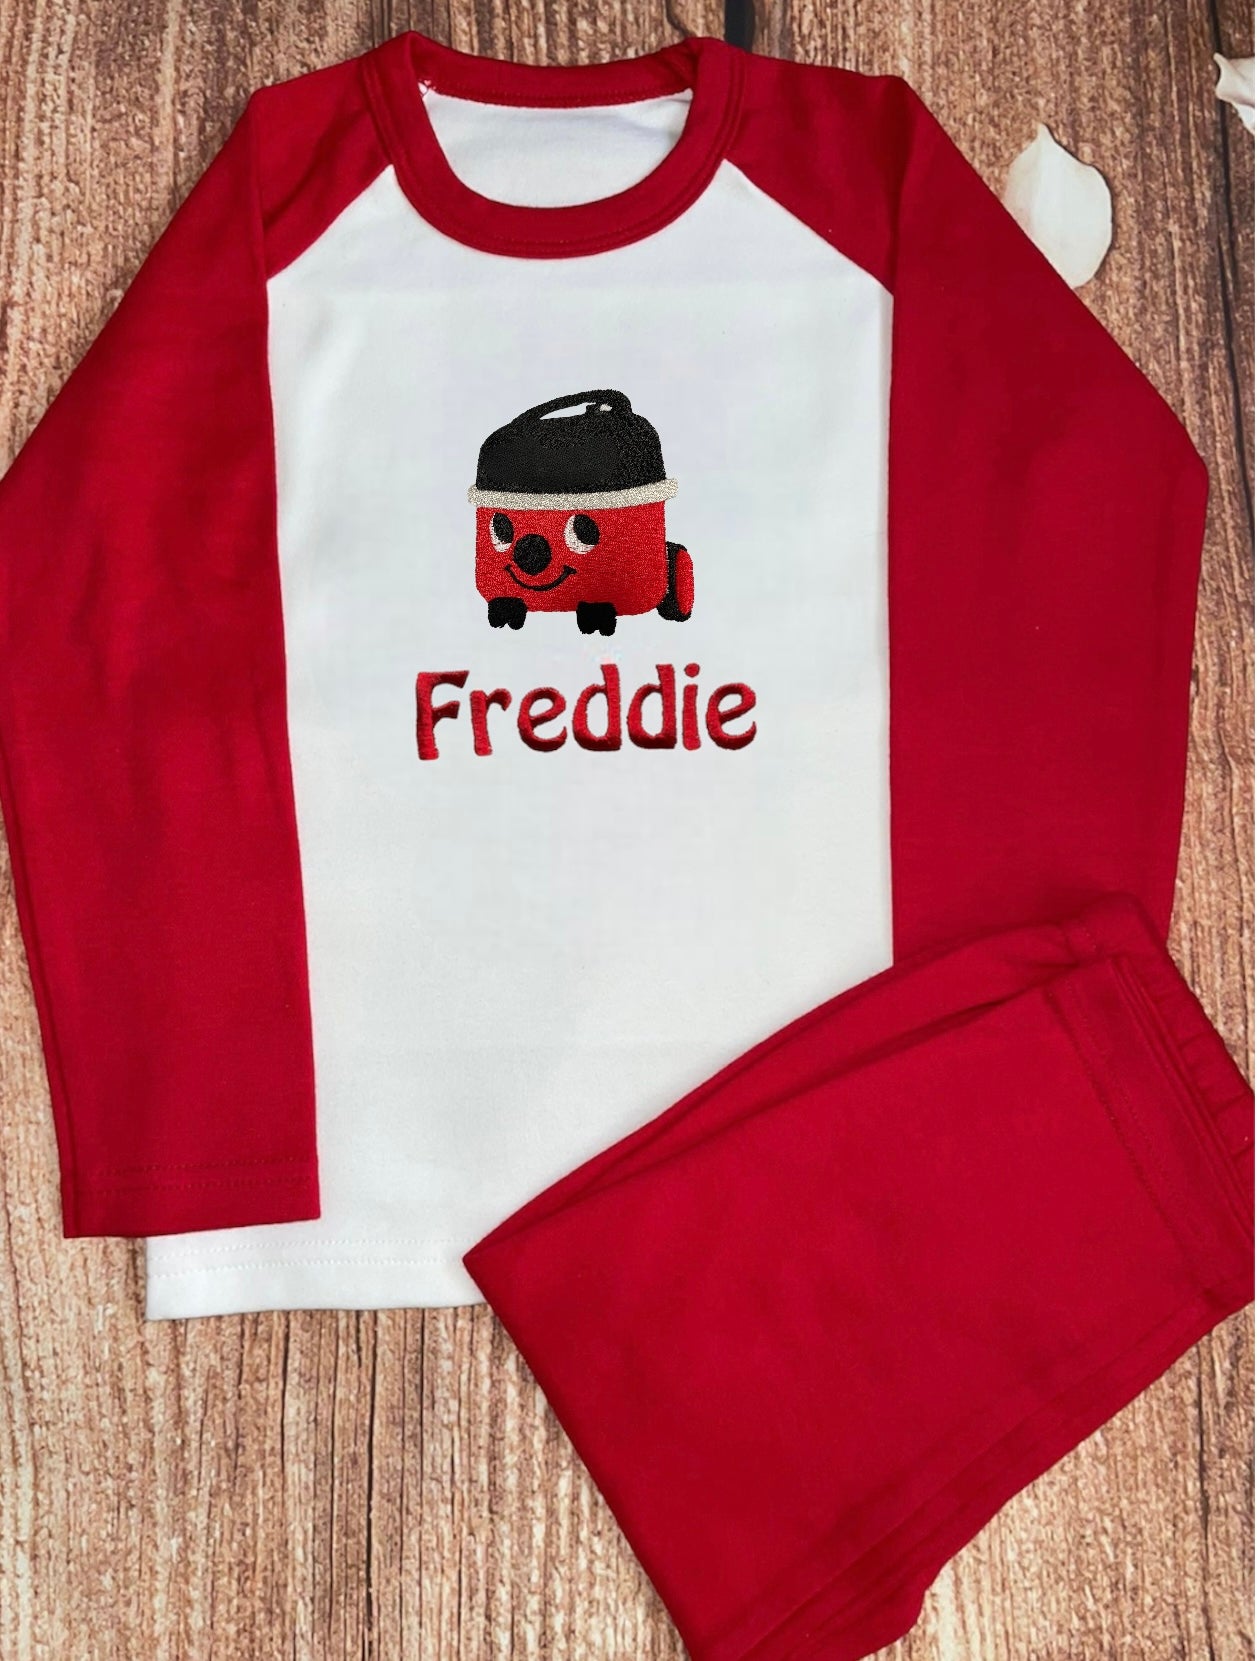 Personalised Pyjamas, embroidered with name & red hoover design. Gift, keepsake, high quality, soft, PJ's